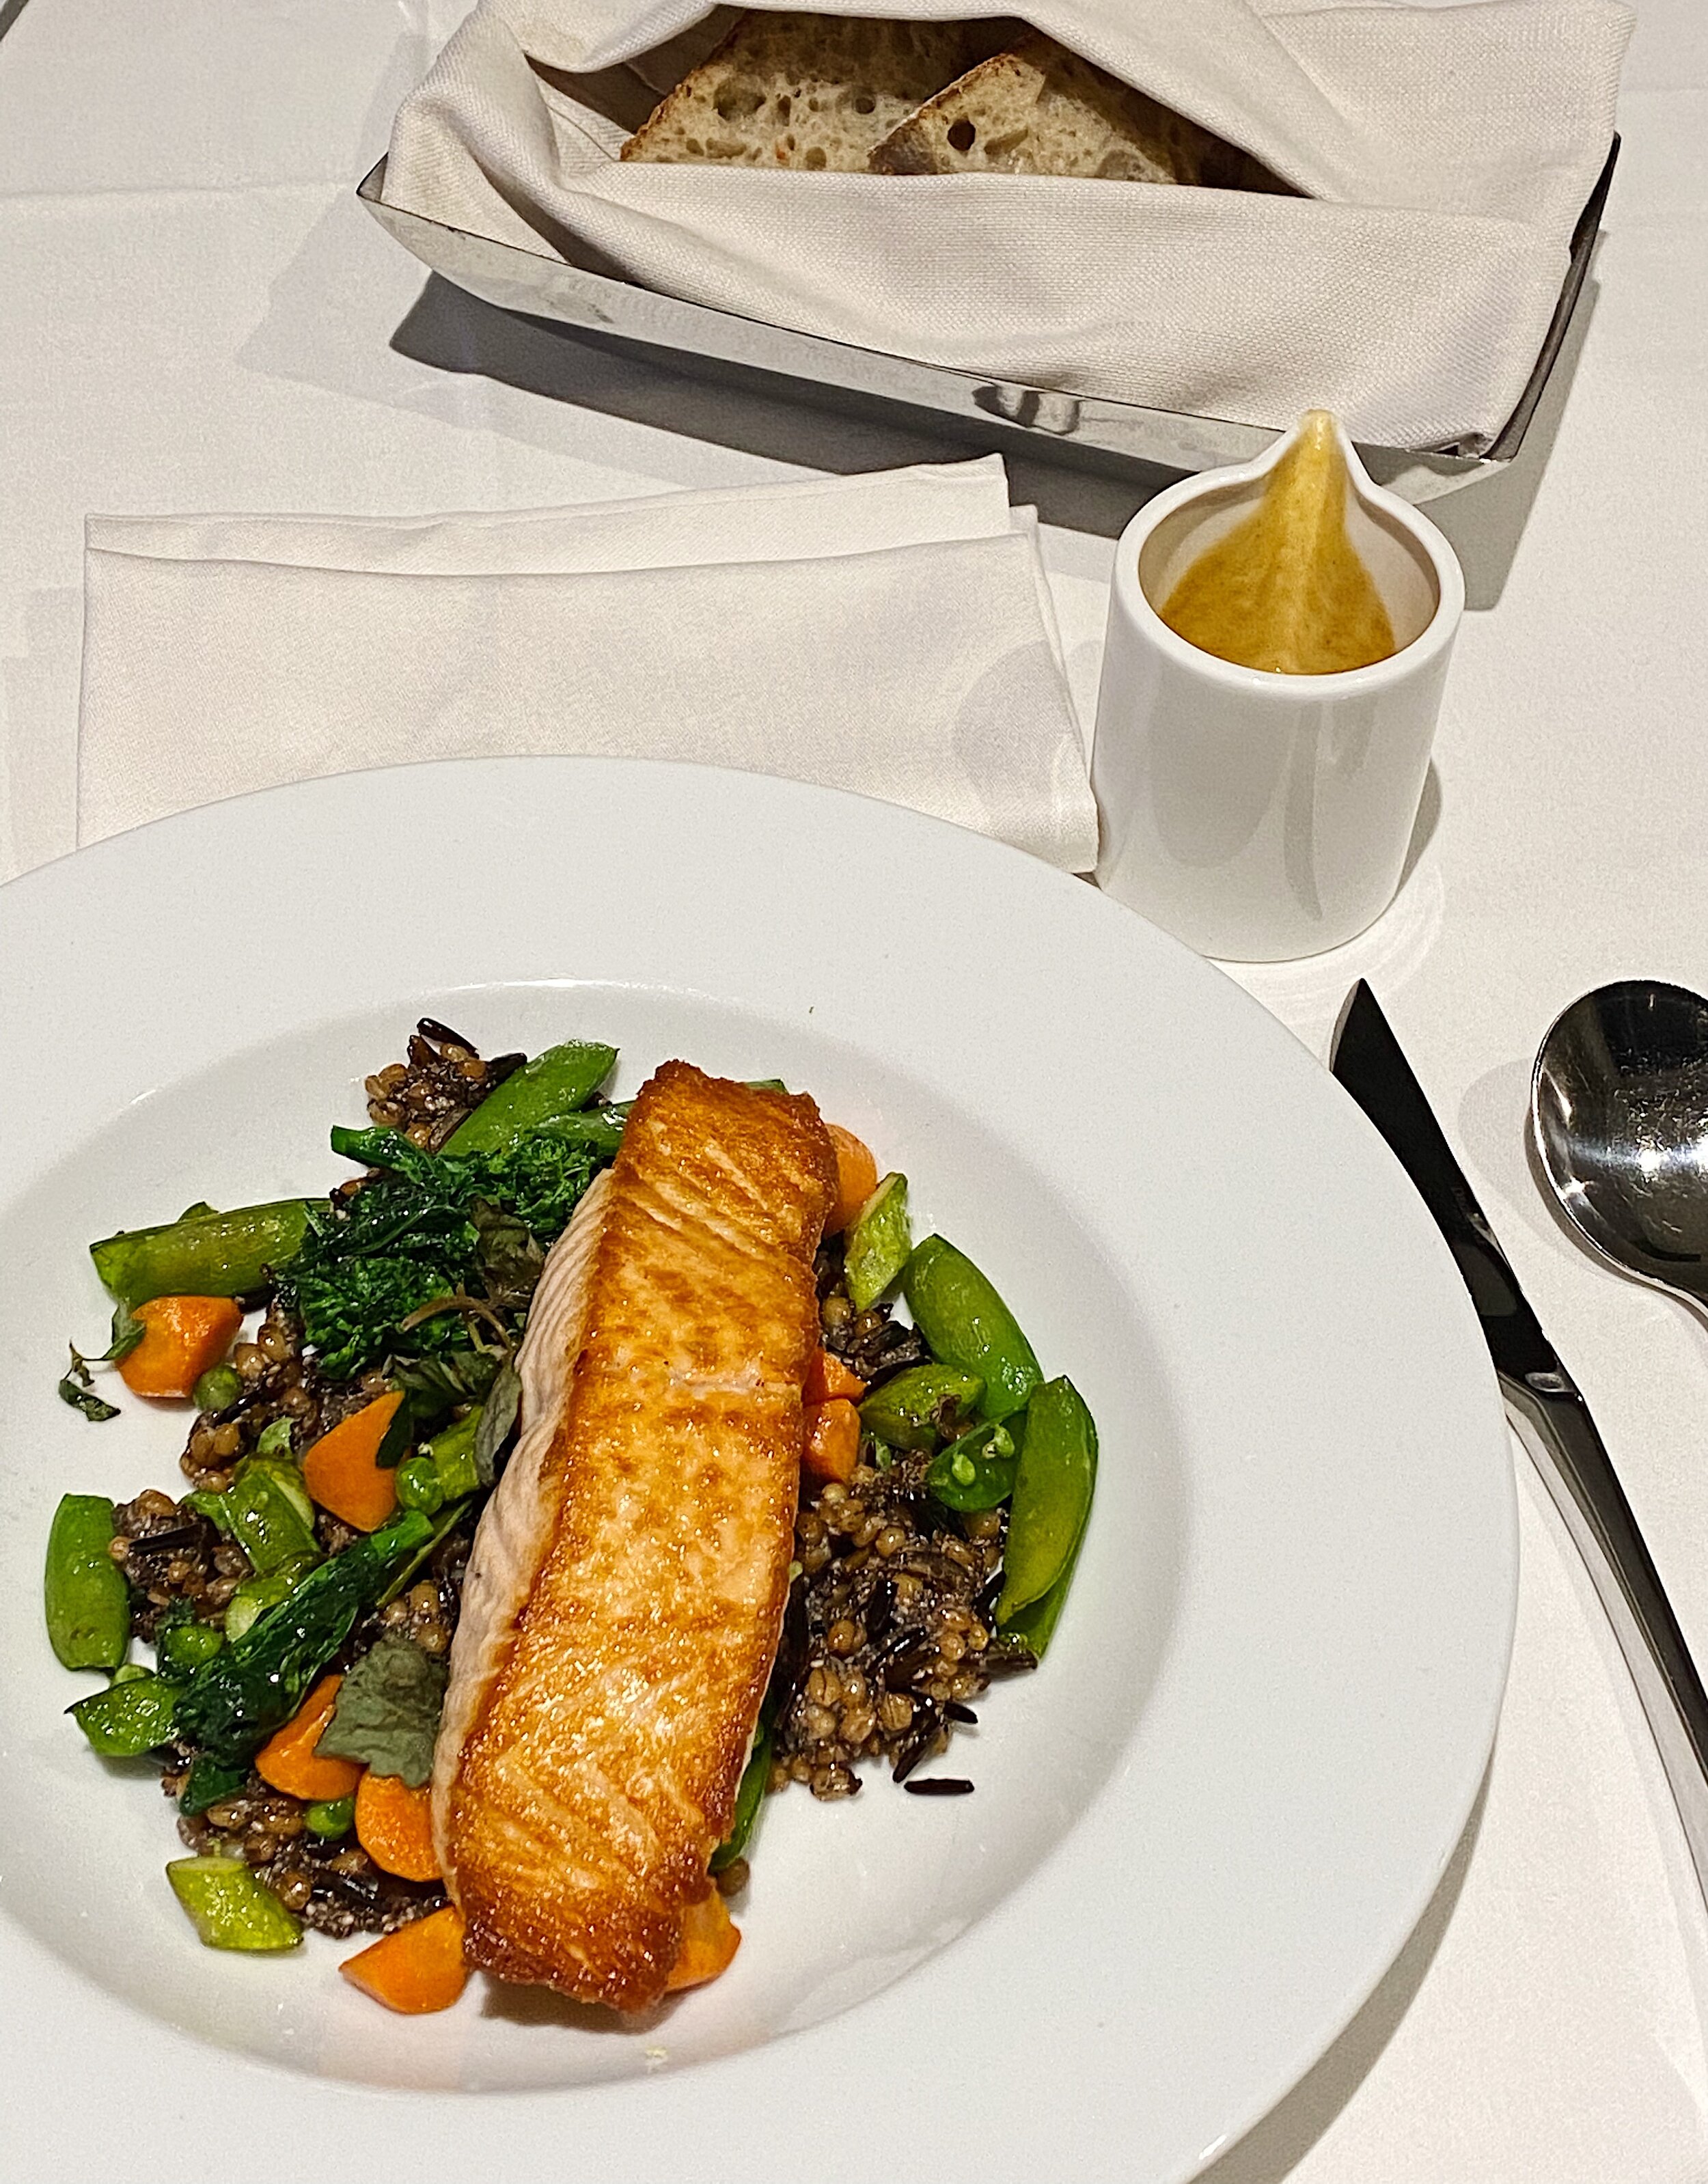 Jean-Georges' Ancient Grains and Market Vegetables with Salmon, Four Seasons, Philadelphia, PA